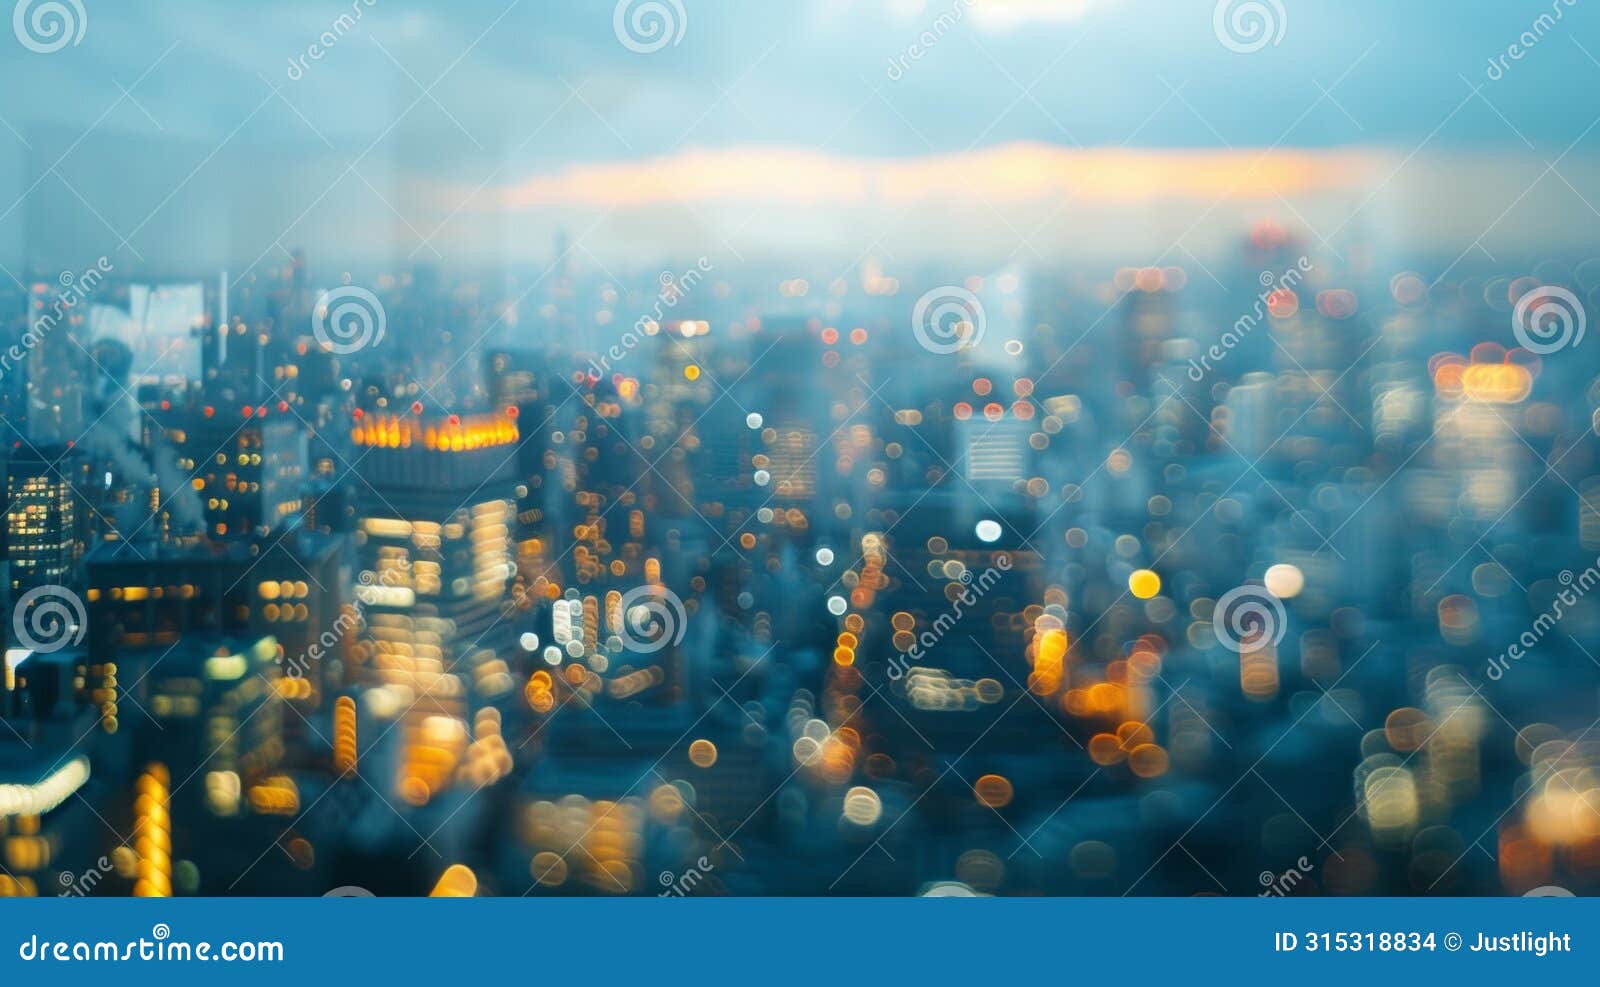 soft blurred cityscapes from different continents merging together in a dreamlike haze representing the merging of